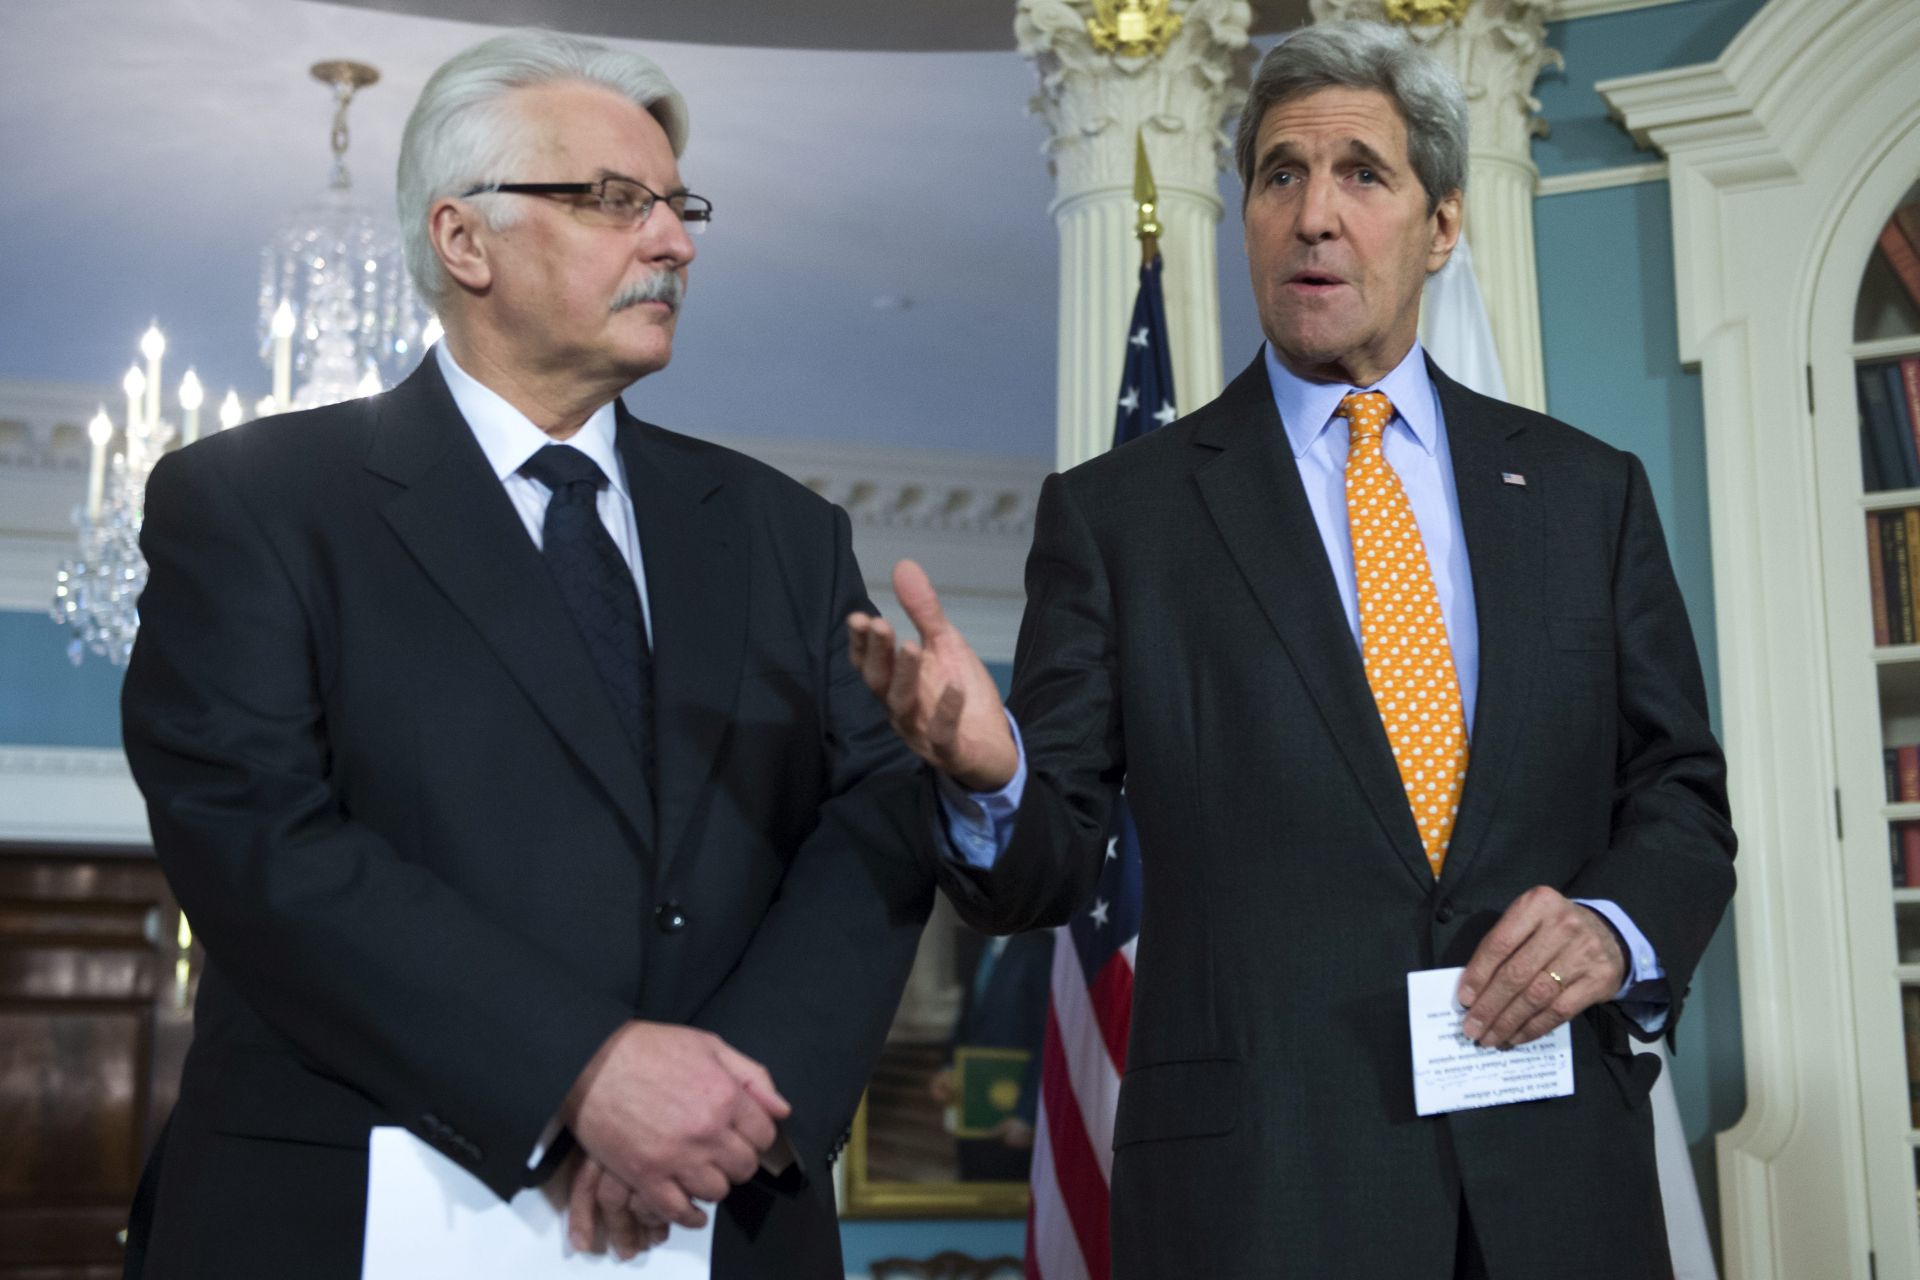 epa05166423 US Secretary of State John Kerry (R) shakes hands with Polish Foreign Minister Witold Waszczykowski (L), delivers remarks to the news media prior to their meeting at the State Department in Washington, DC, USA, 17 February 2016.  EPA/SHAWN THEW